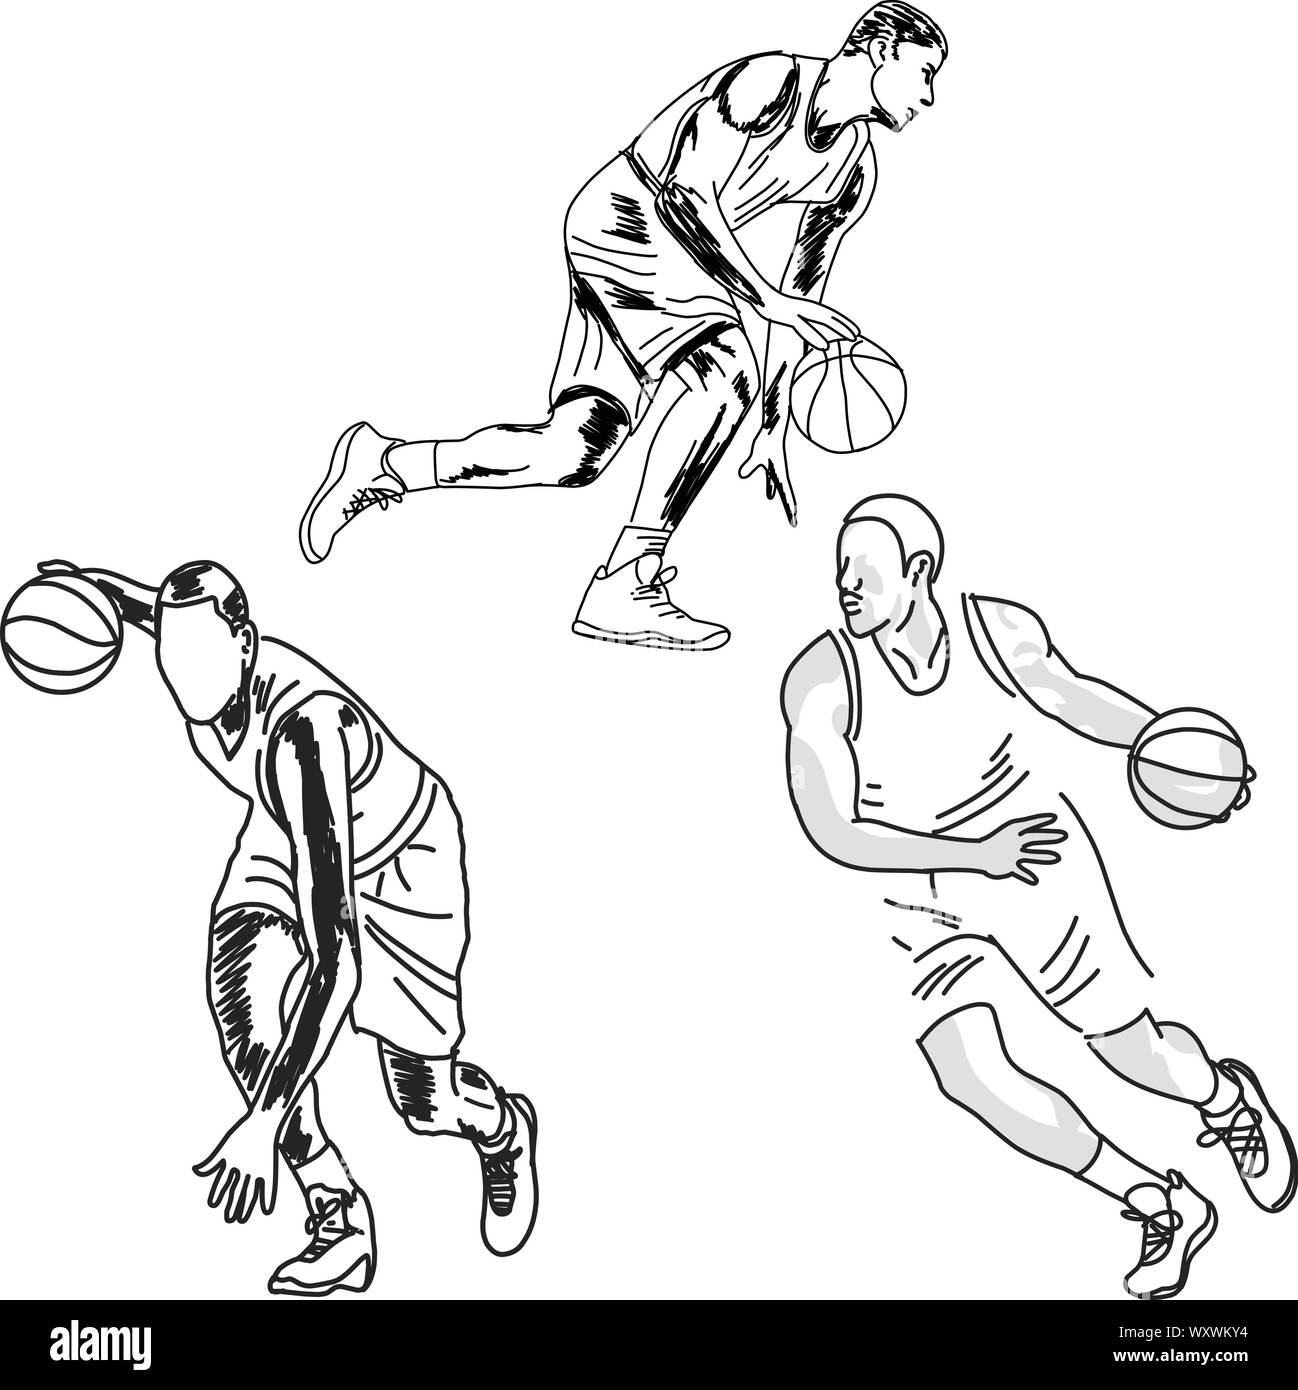 illustrations set of Basketball player. vector drawing. Stock Vector